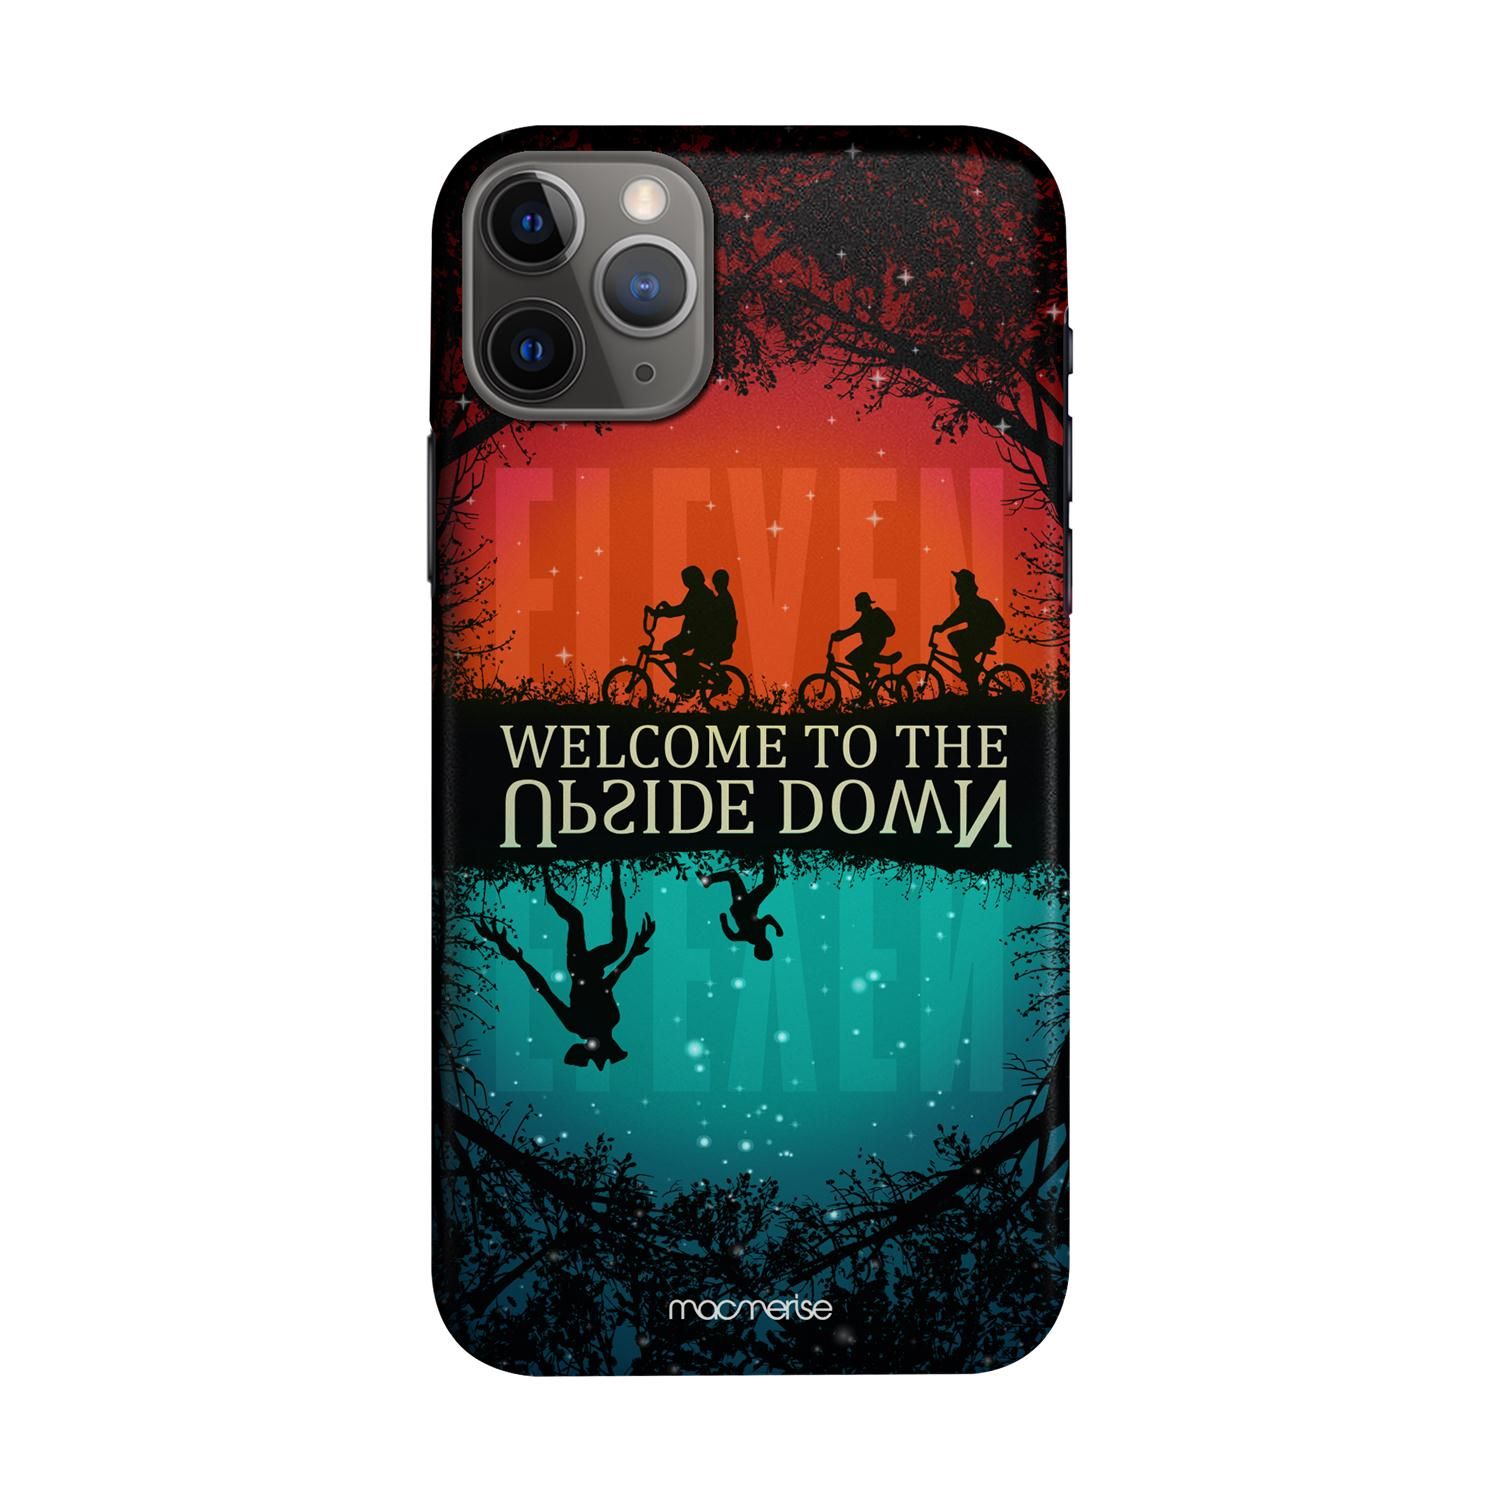 Buy Upside Down - Sleek Phone Case for iPhone 11 Pro Max Online